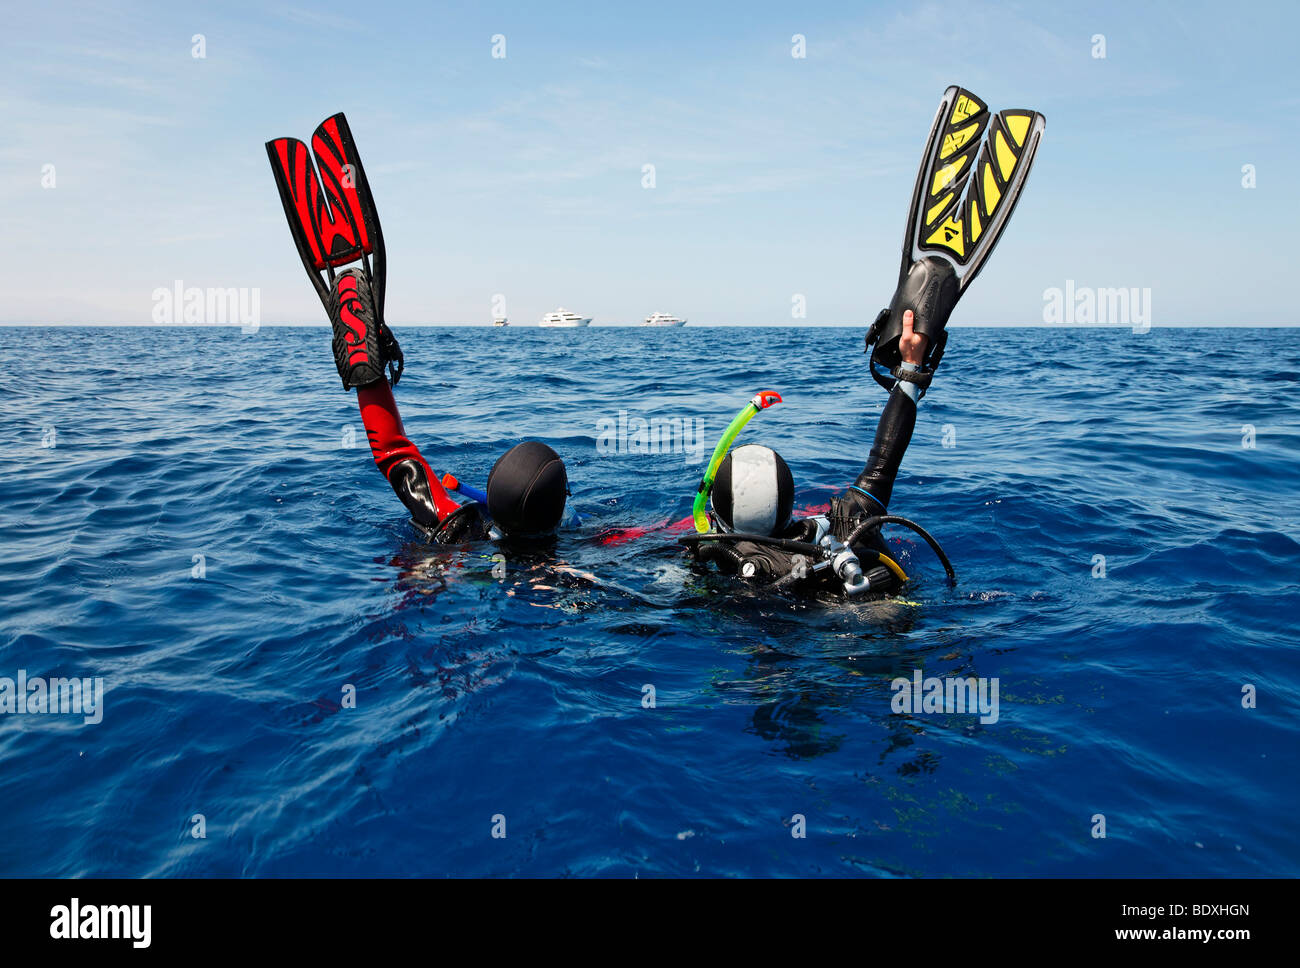 Drifting divers at sea are trying to get the attention of people on dive ships on the horizon by waving with their diving fins, Stock Photo